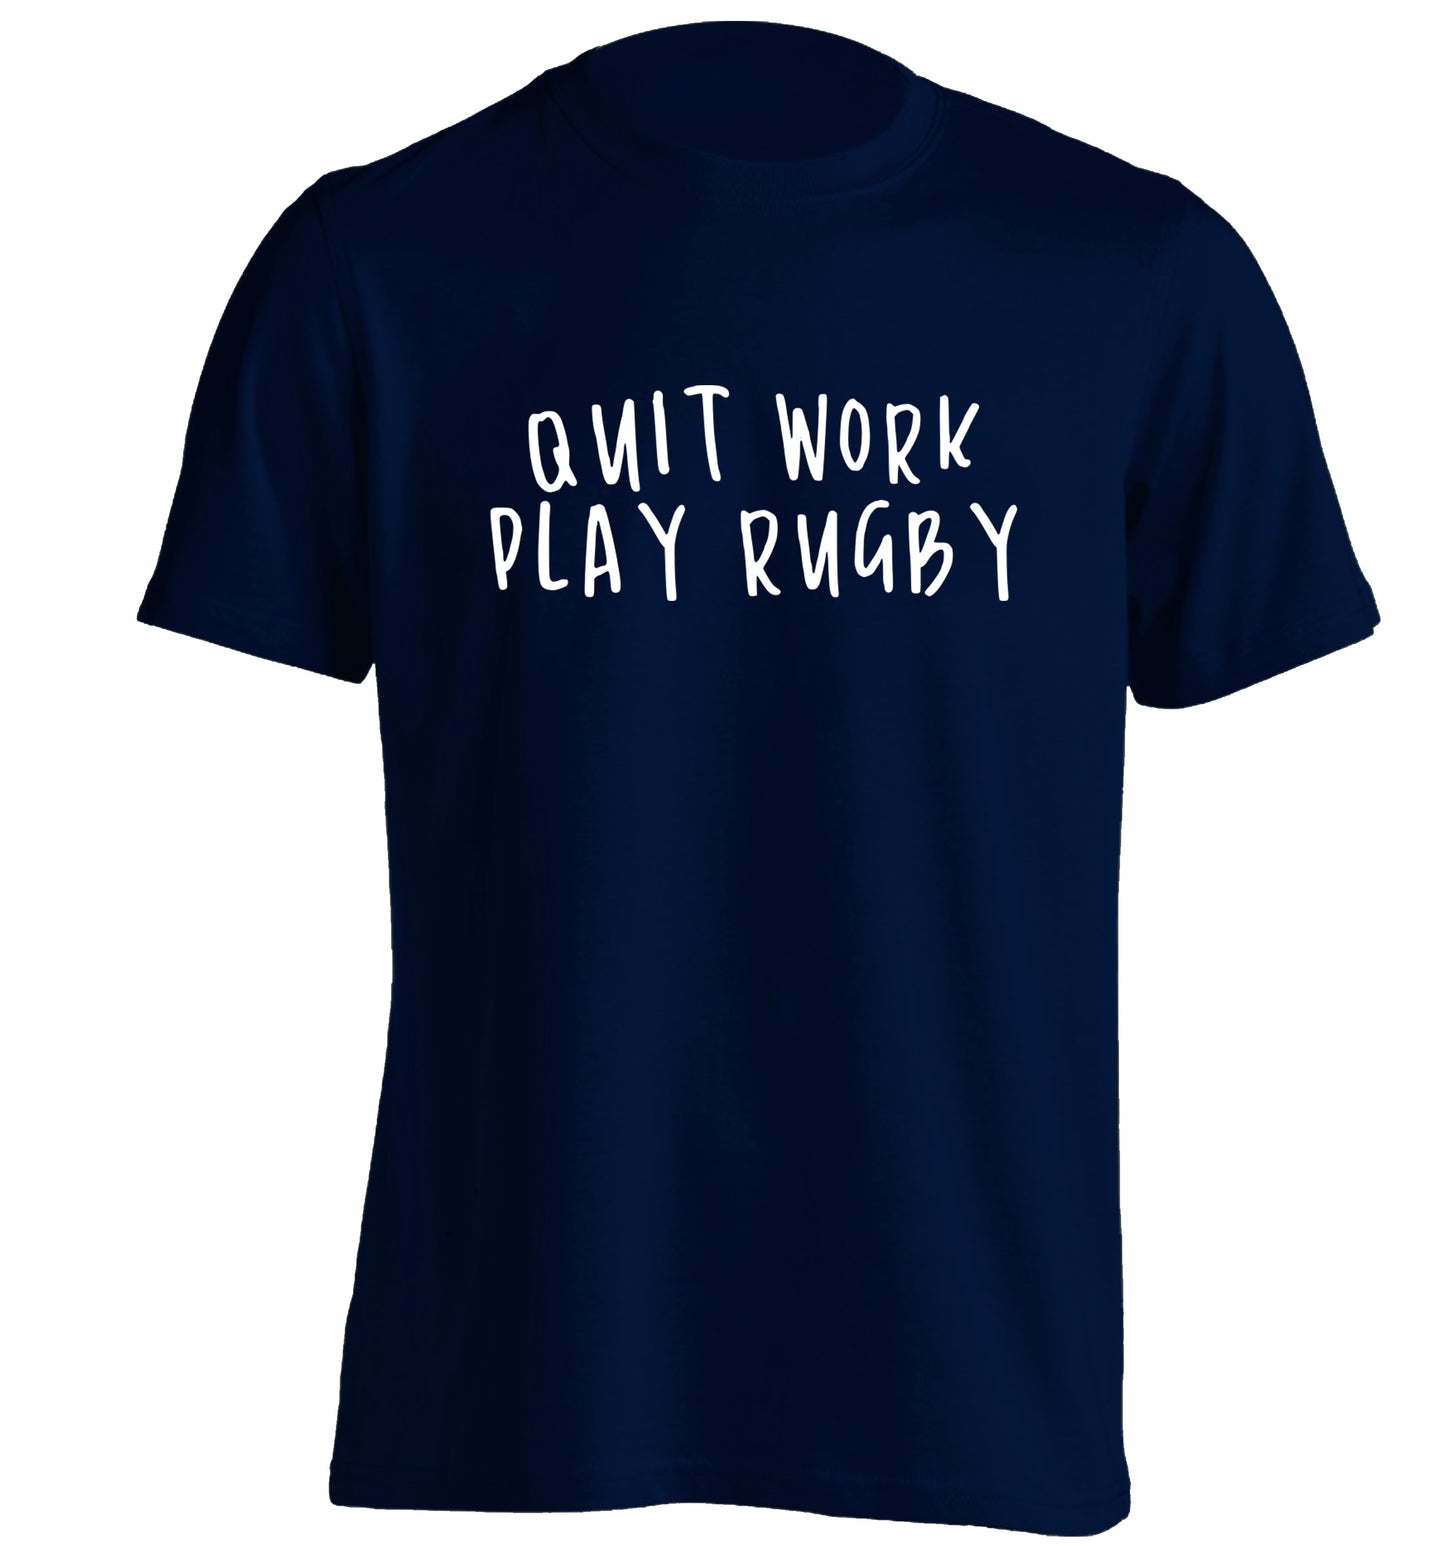 Quit work play rugby adults unisex navy Tshirt 2XL